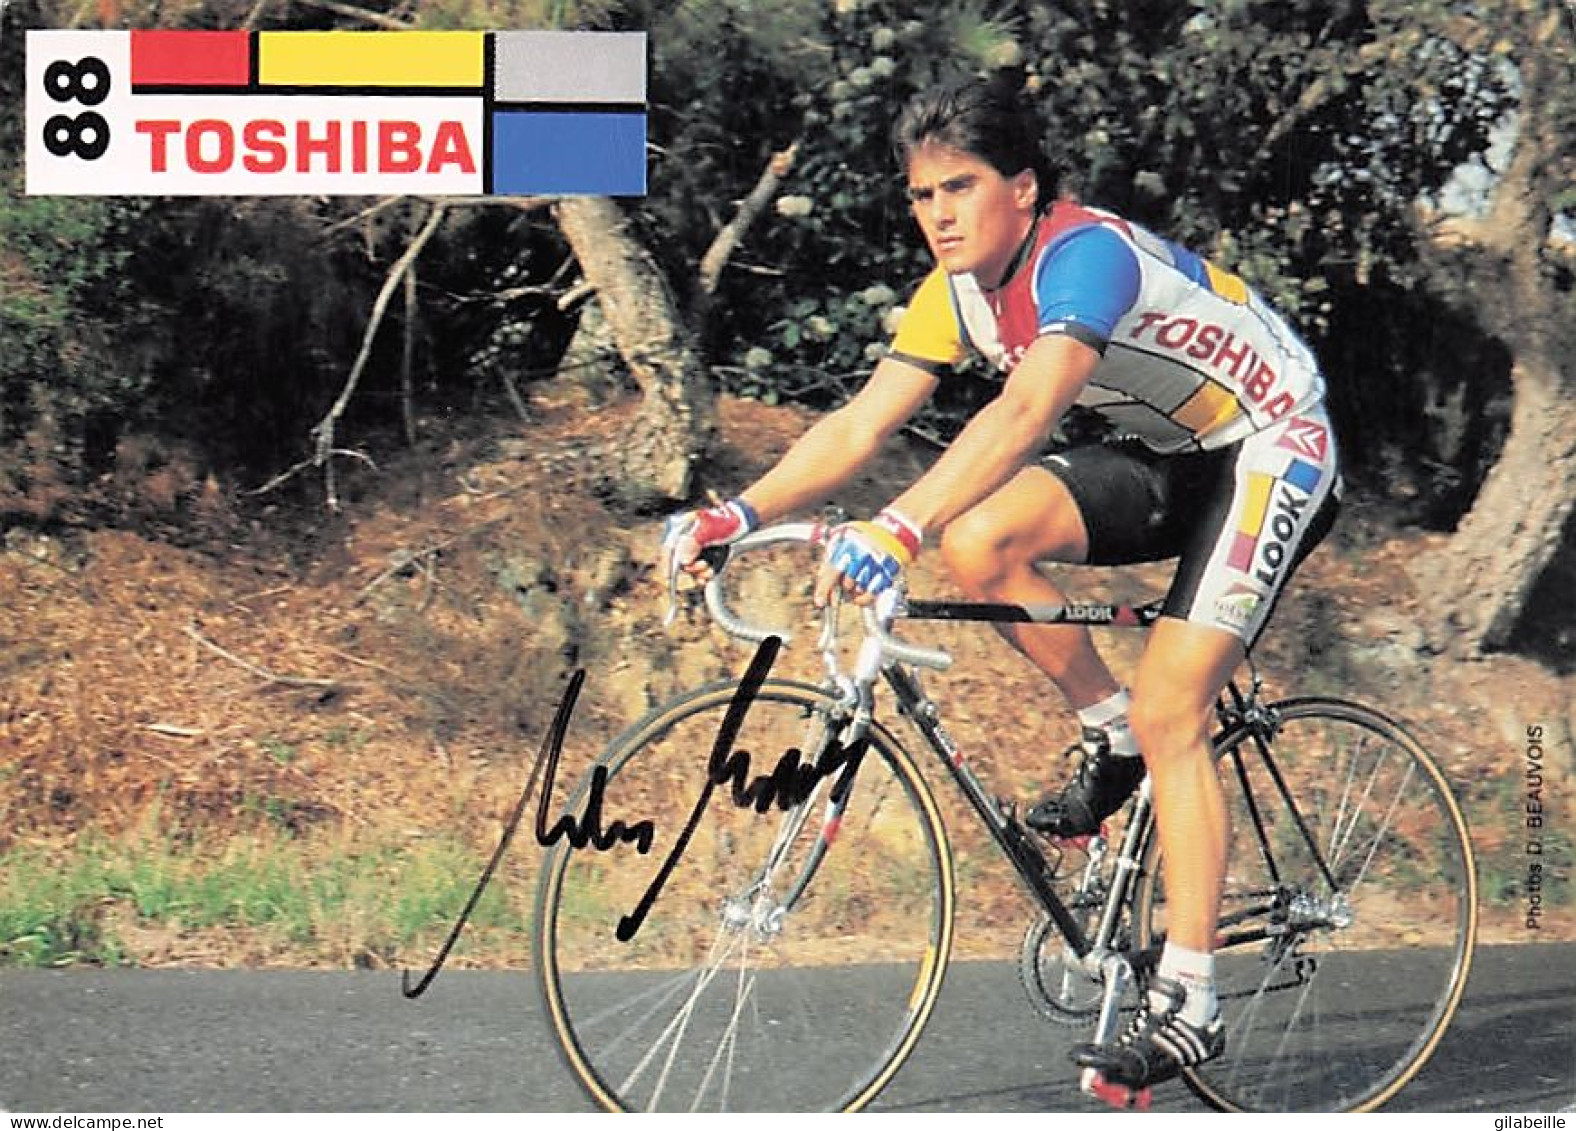 Vélo Coureur Cycliste Allemand Andreas Kappes - Team Toshiba  -   Cycling - Cyclisme - Ciclismo - Wielrennen - Signée - Radsport